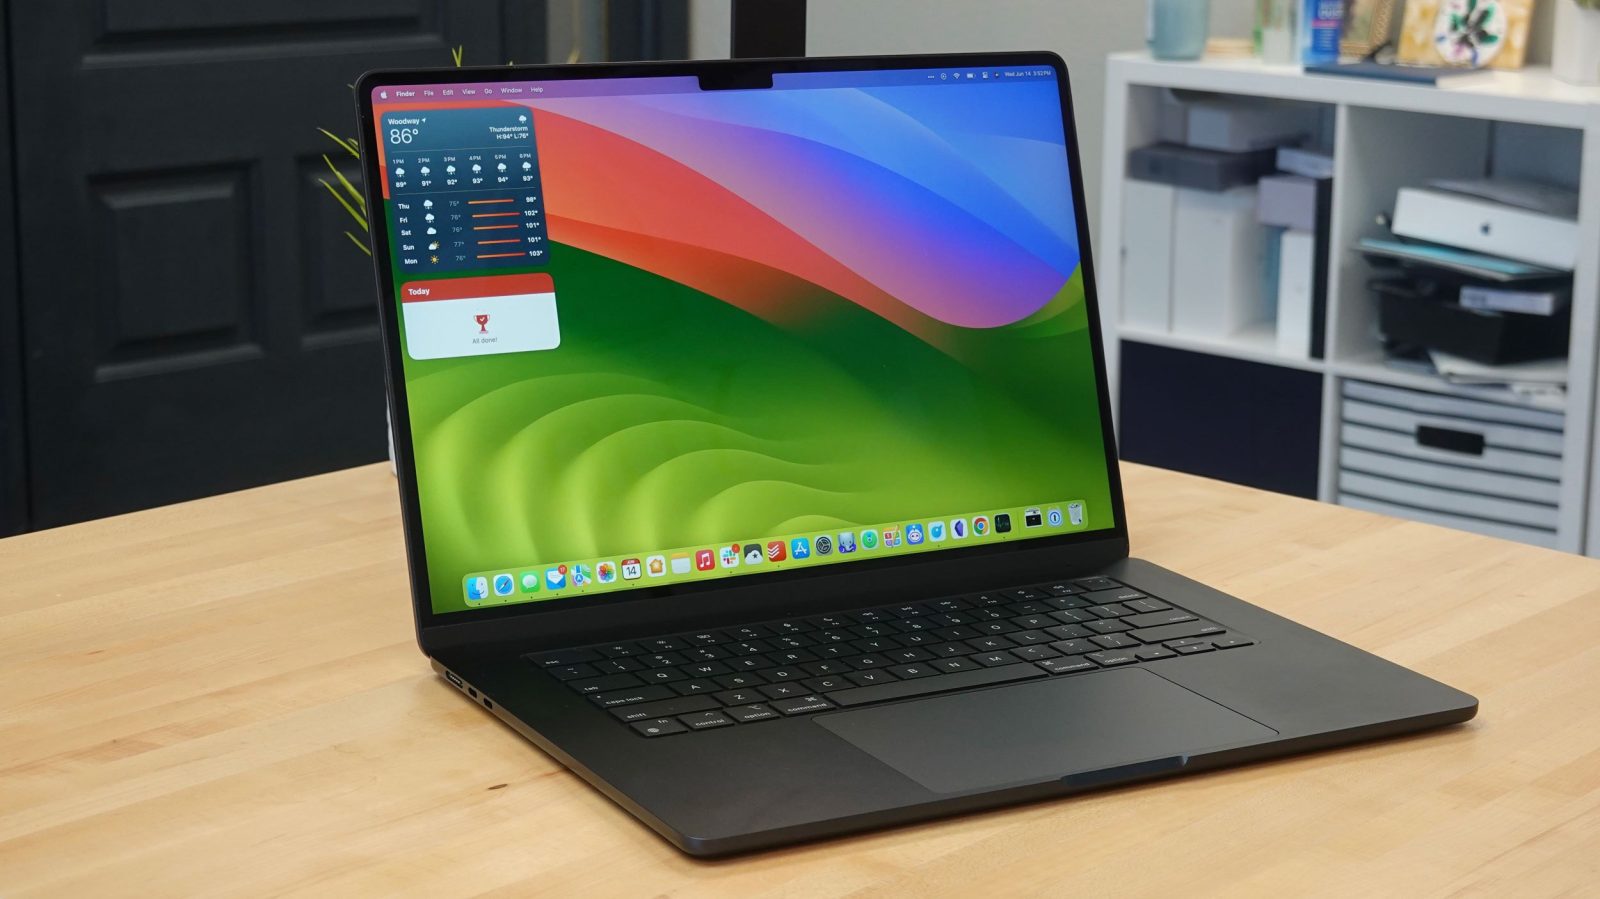 Intel prevented Apple from making a 15-inch MacBook Air: “It just did not  say 'Air' to us” - 9to5Mac